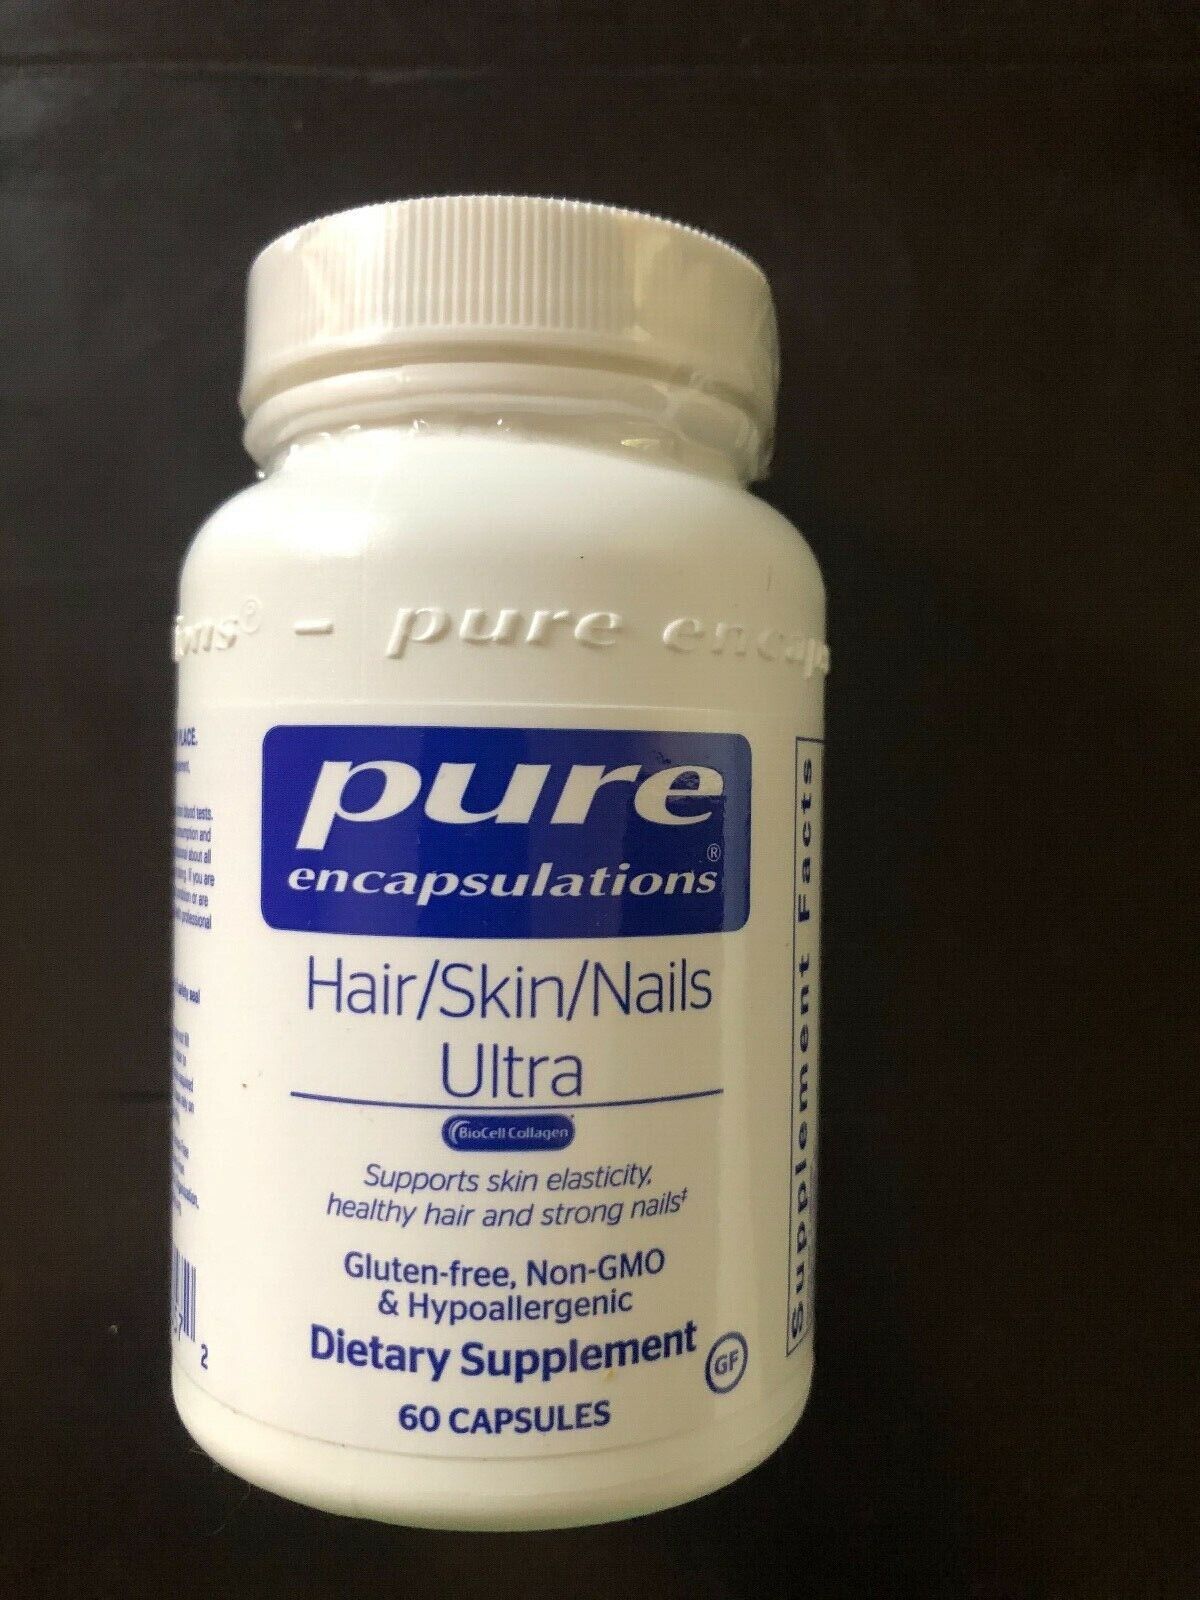 Pure Encapsulations Hair / Skin / Nails Ultra - 60 Capsules (FREE SHIPPING)